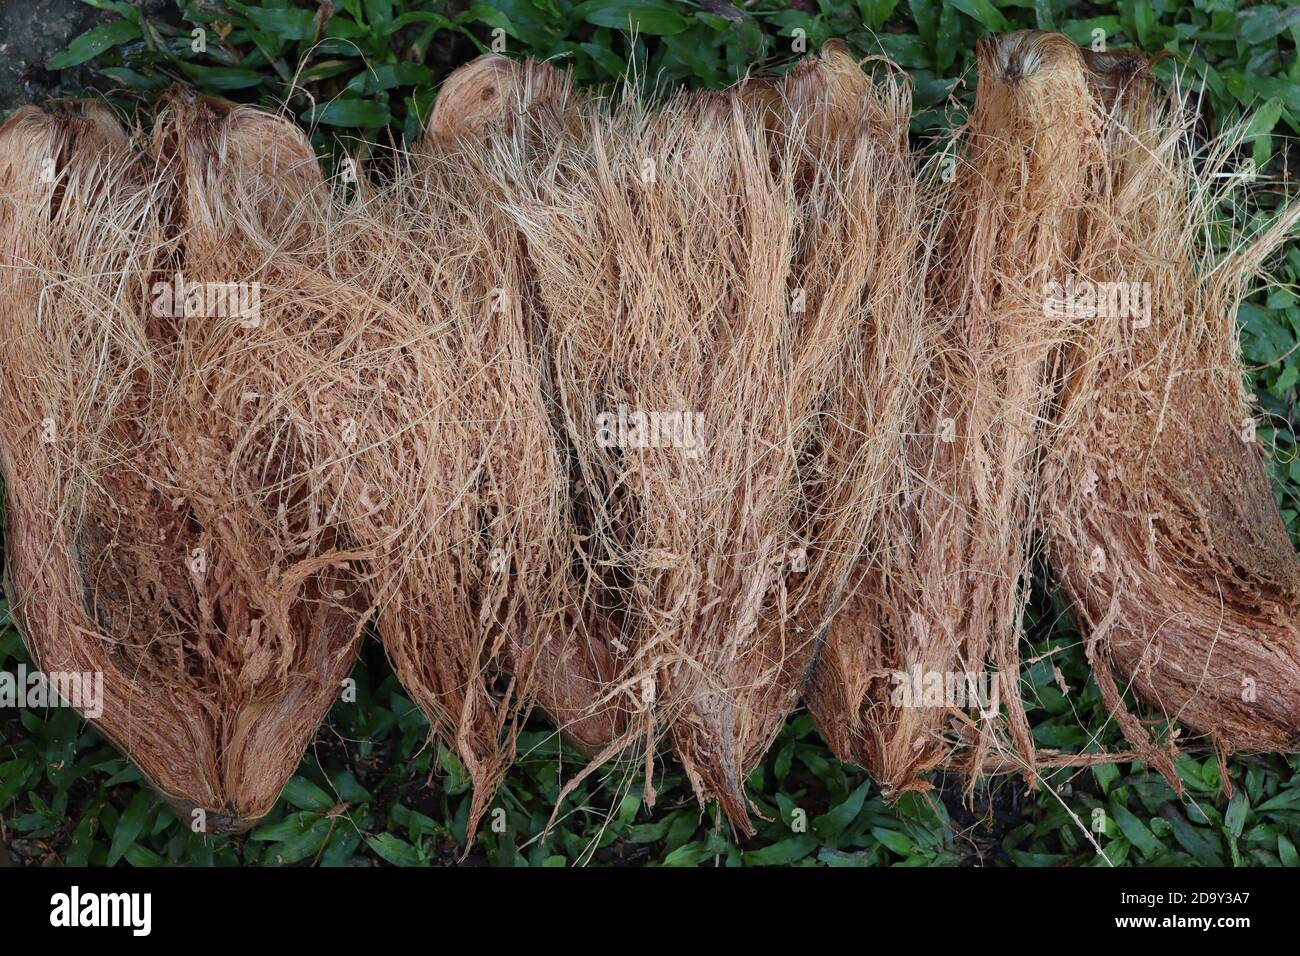 Coconut fiber, there are lot of products such as brooms, brushes, seats, mattresses, floor mats as much more usable items made by coconut fiber. Stock Photo